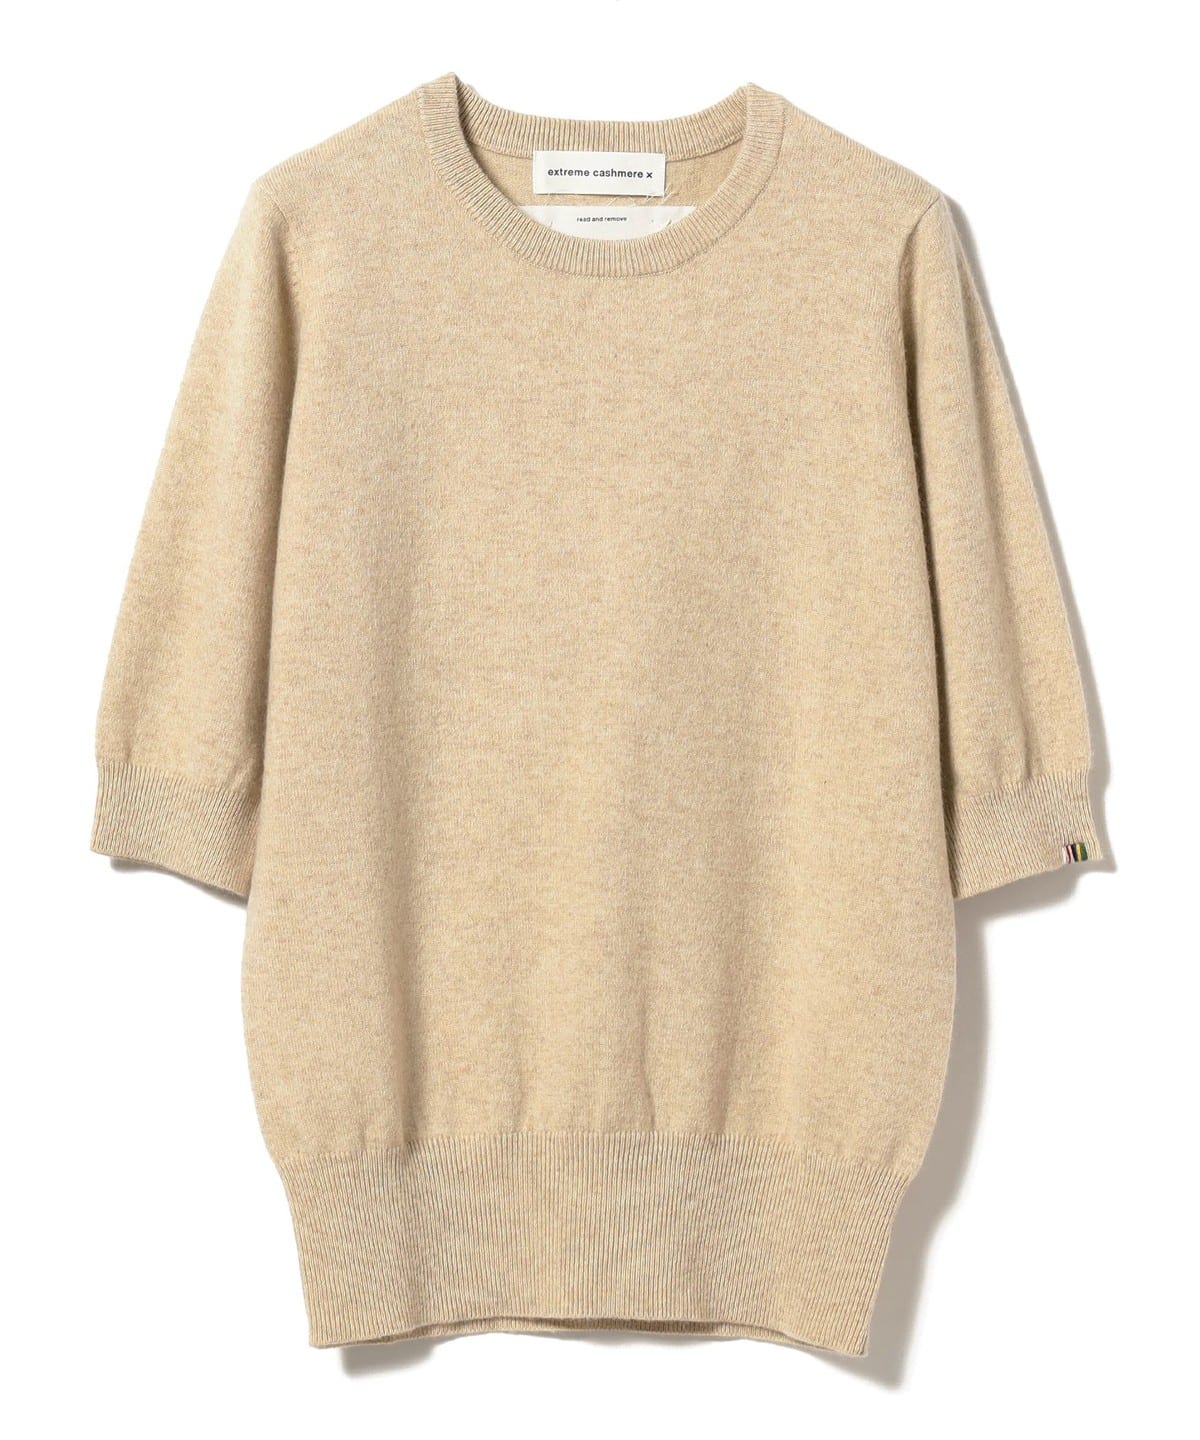 Demi-Luxe BEAMS（デミルクス ビームス）extreme cashmere / well 